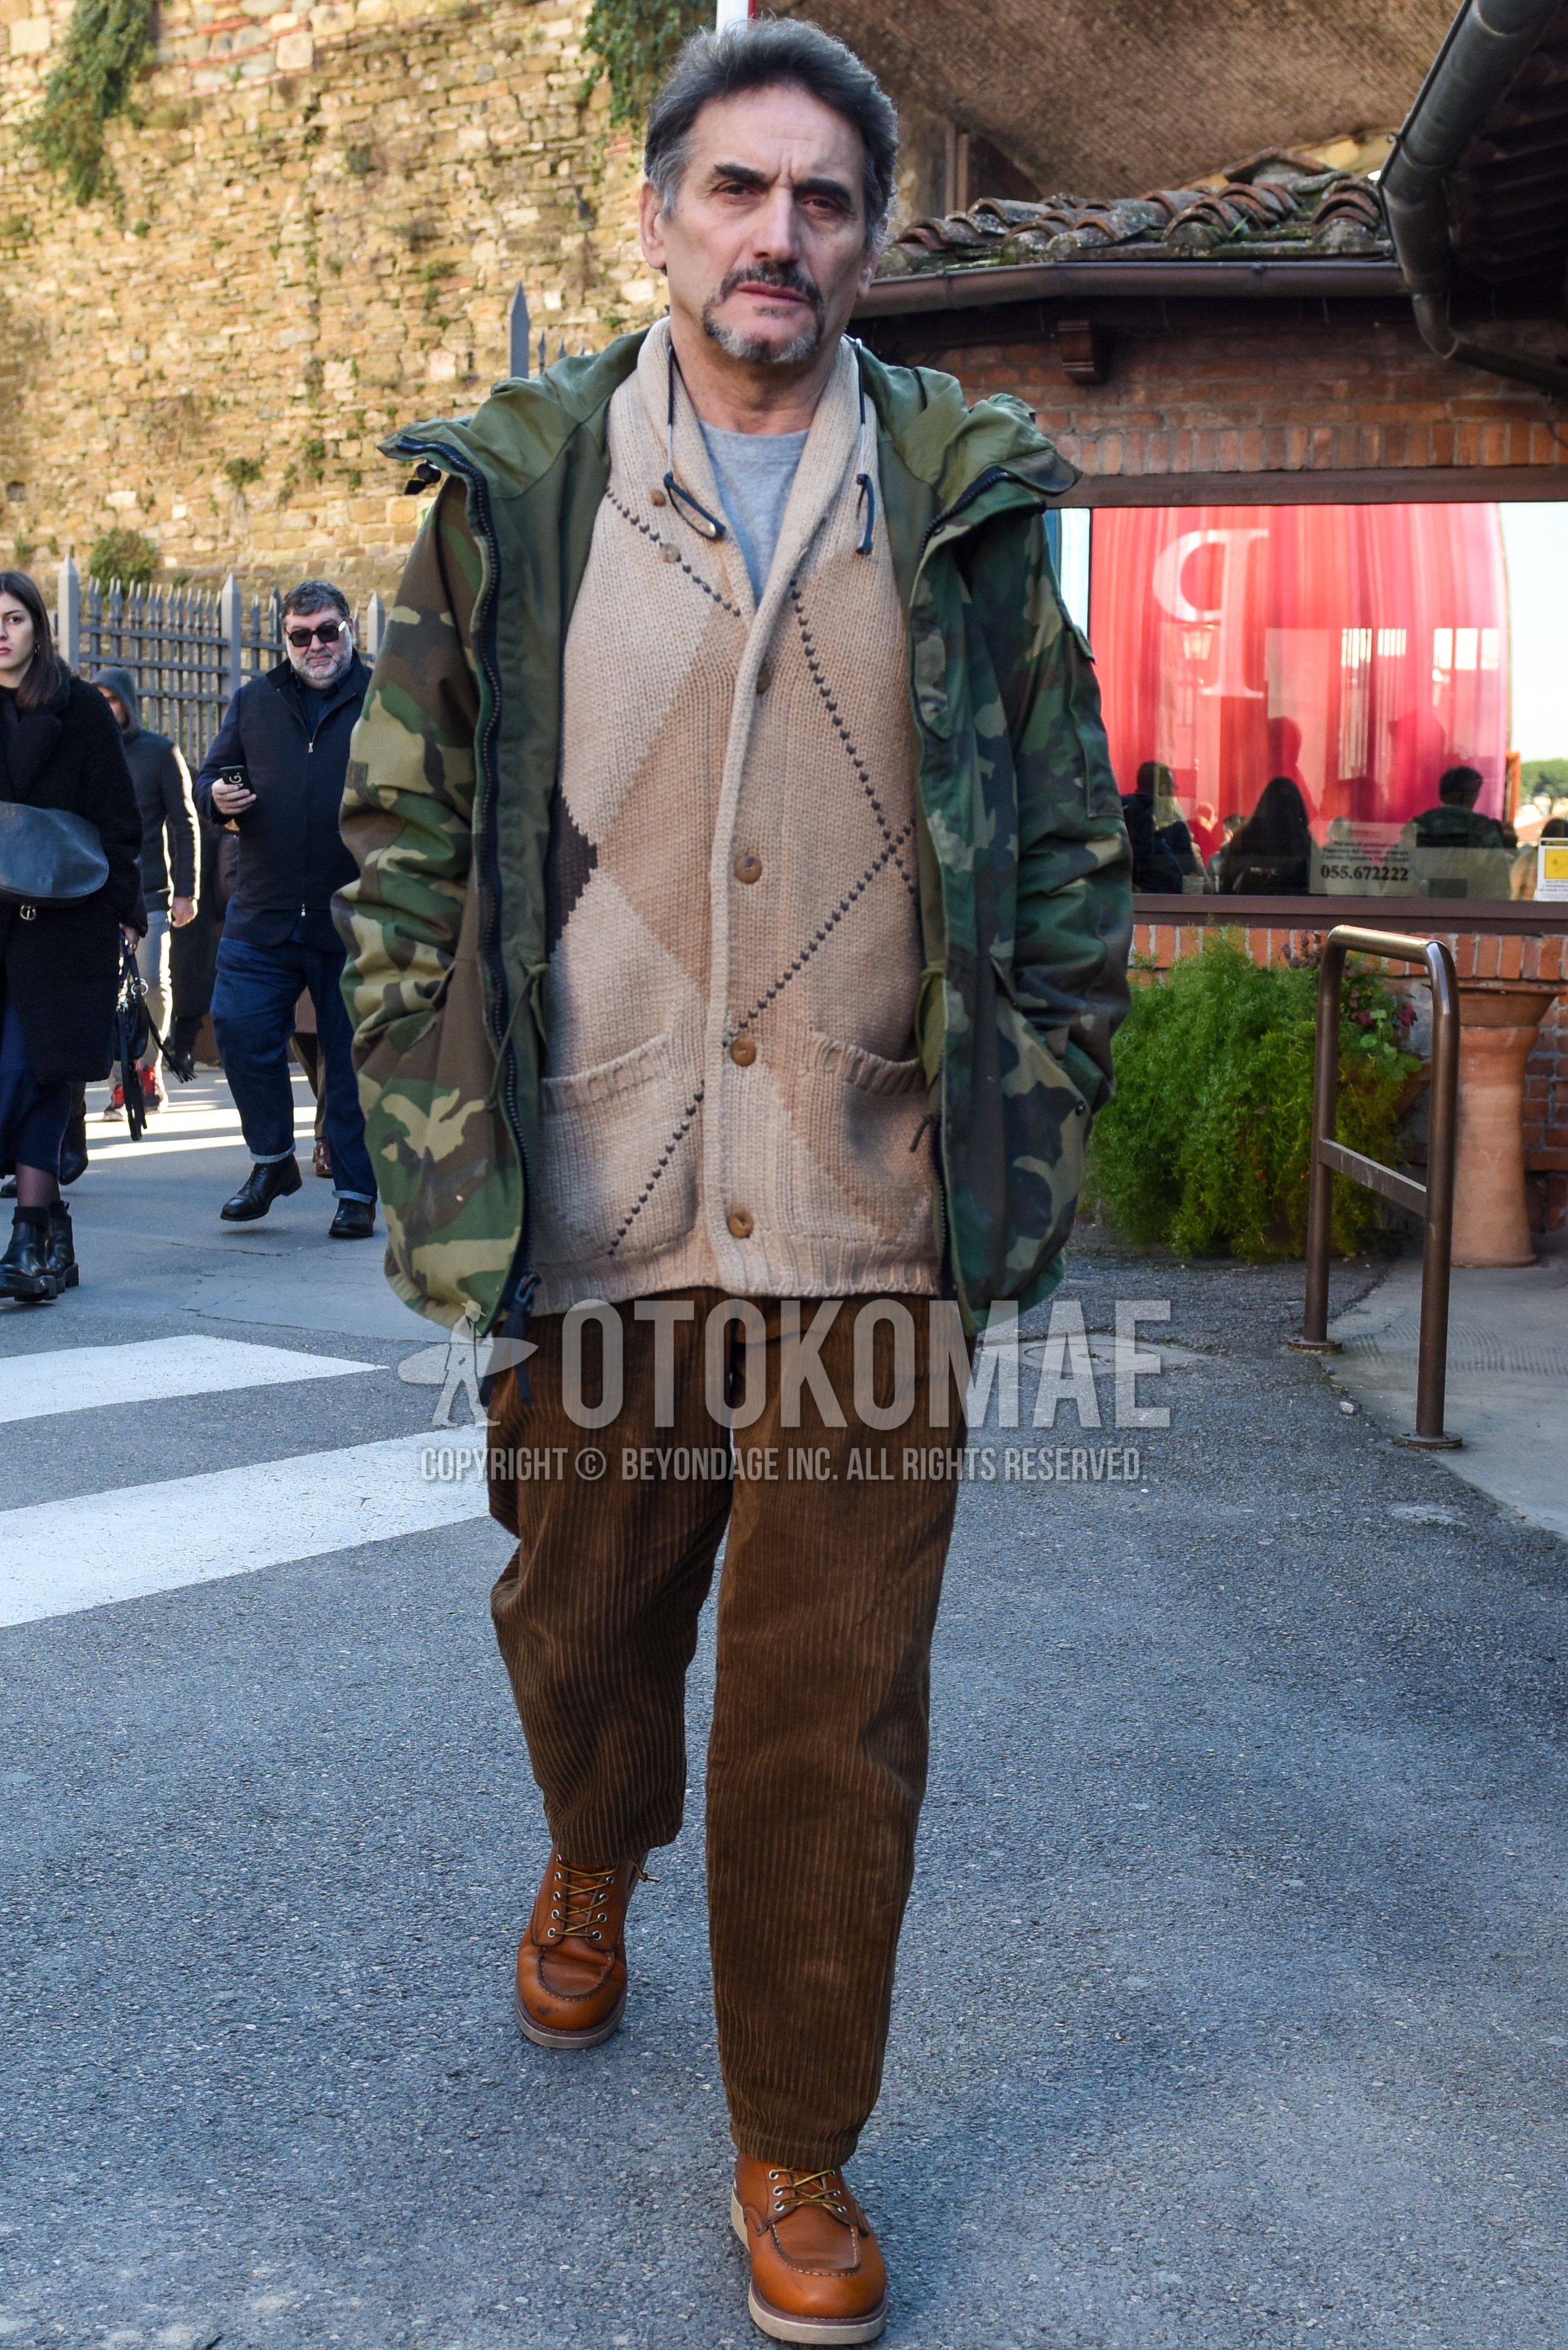 Men's autumn winter outfit with olive green camouflage mountain parka, beige tops/innerwear cardigan, gray plain t-shirt, brown plain winter pants (corduroy,velour), brown work boots.